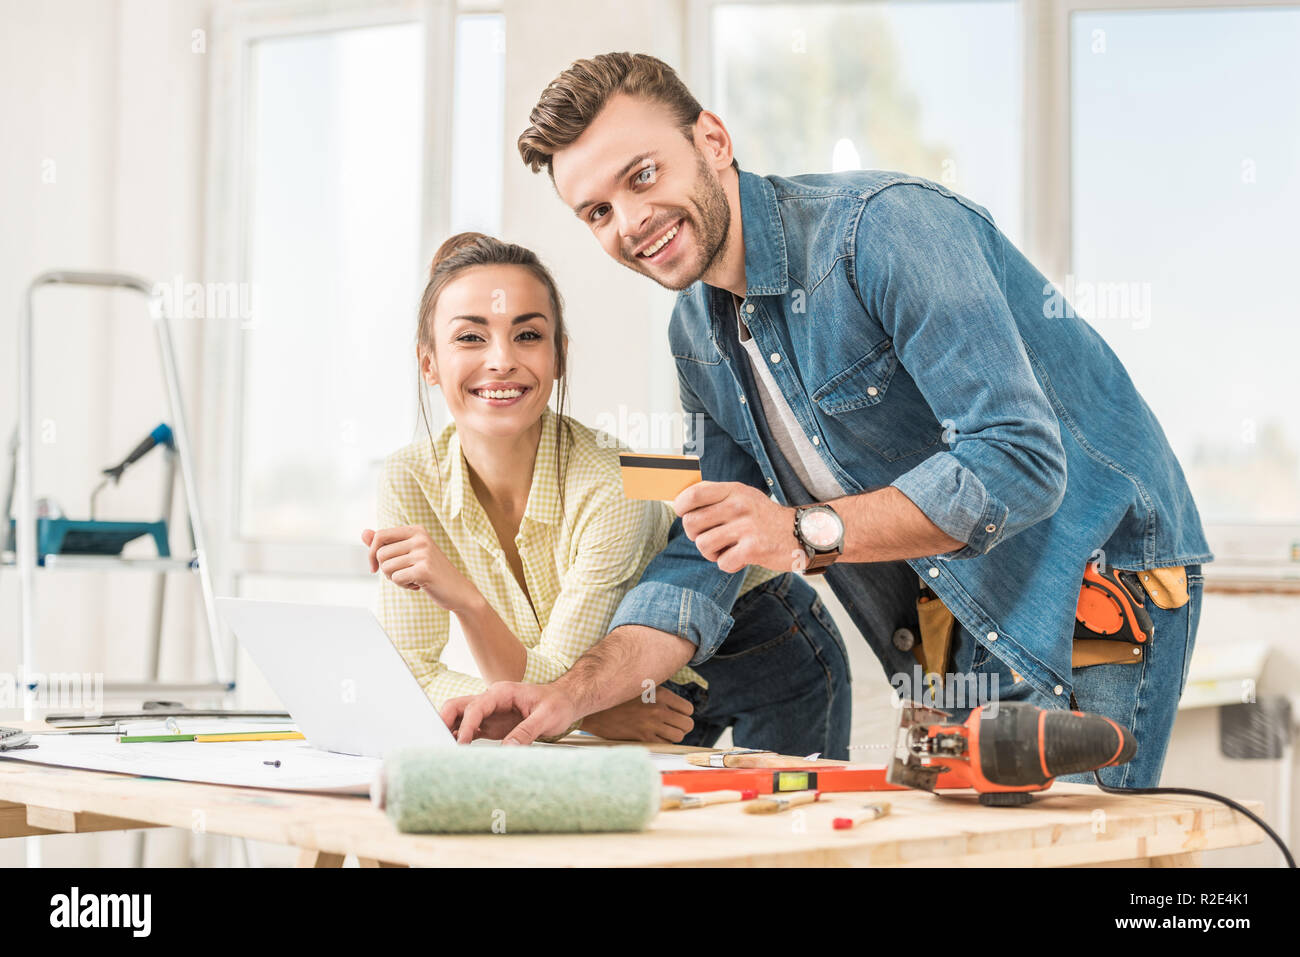 happy young couple with credit card smiling at camera during home improvement Stock Photo